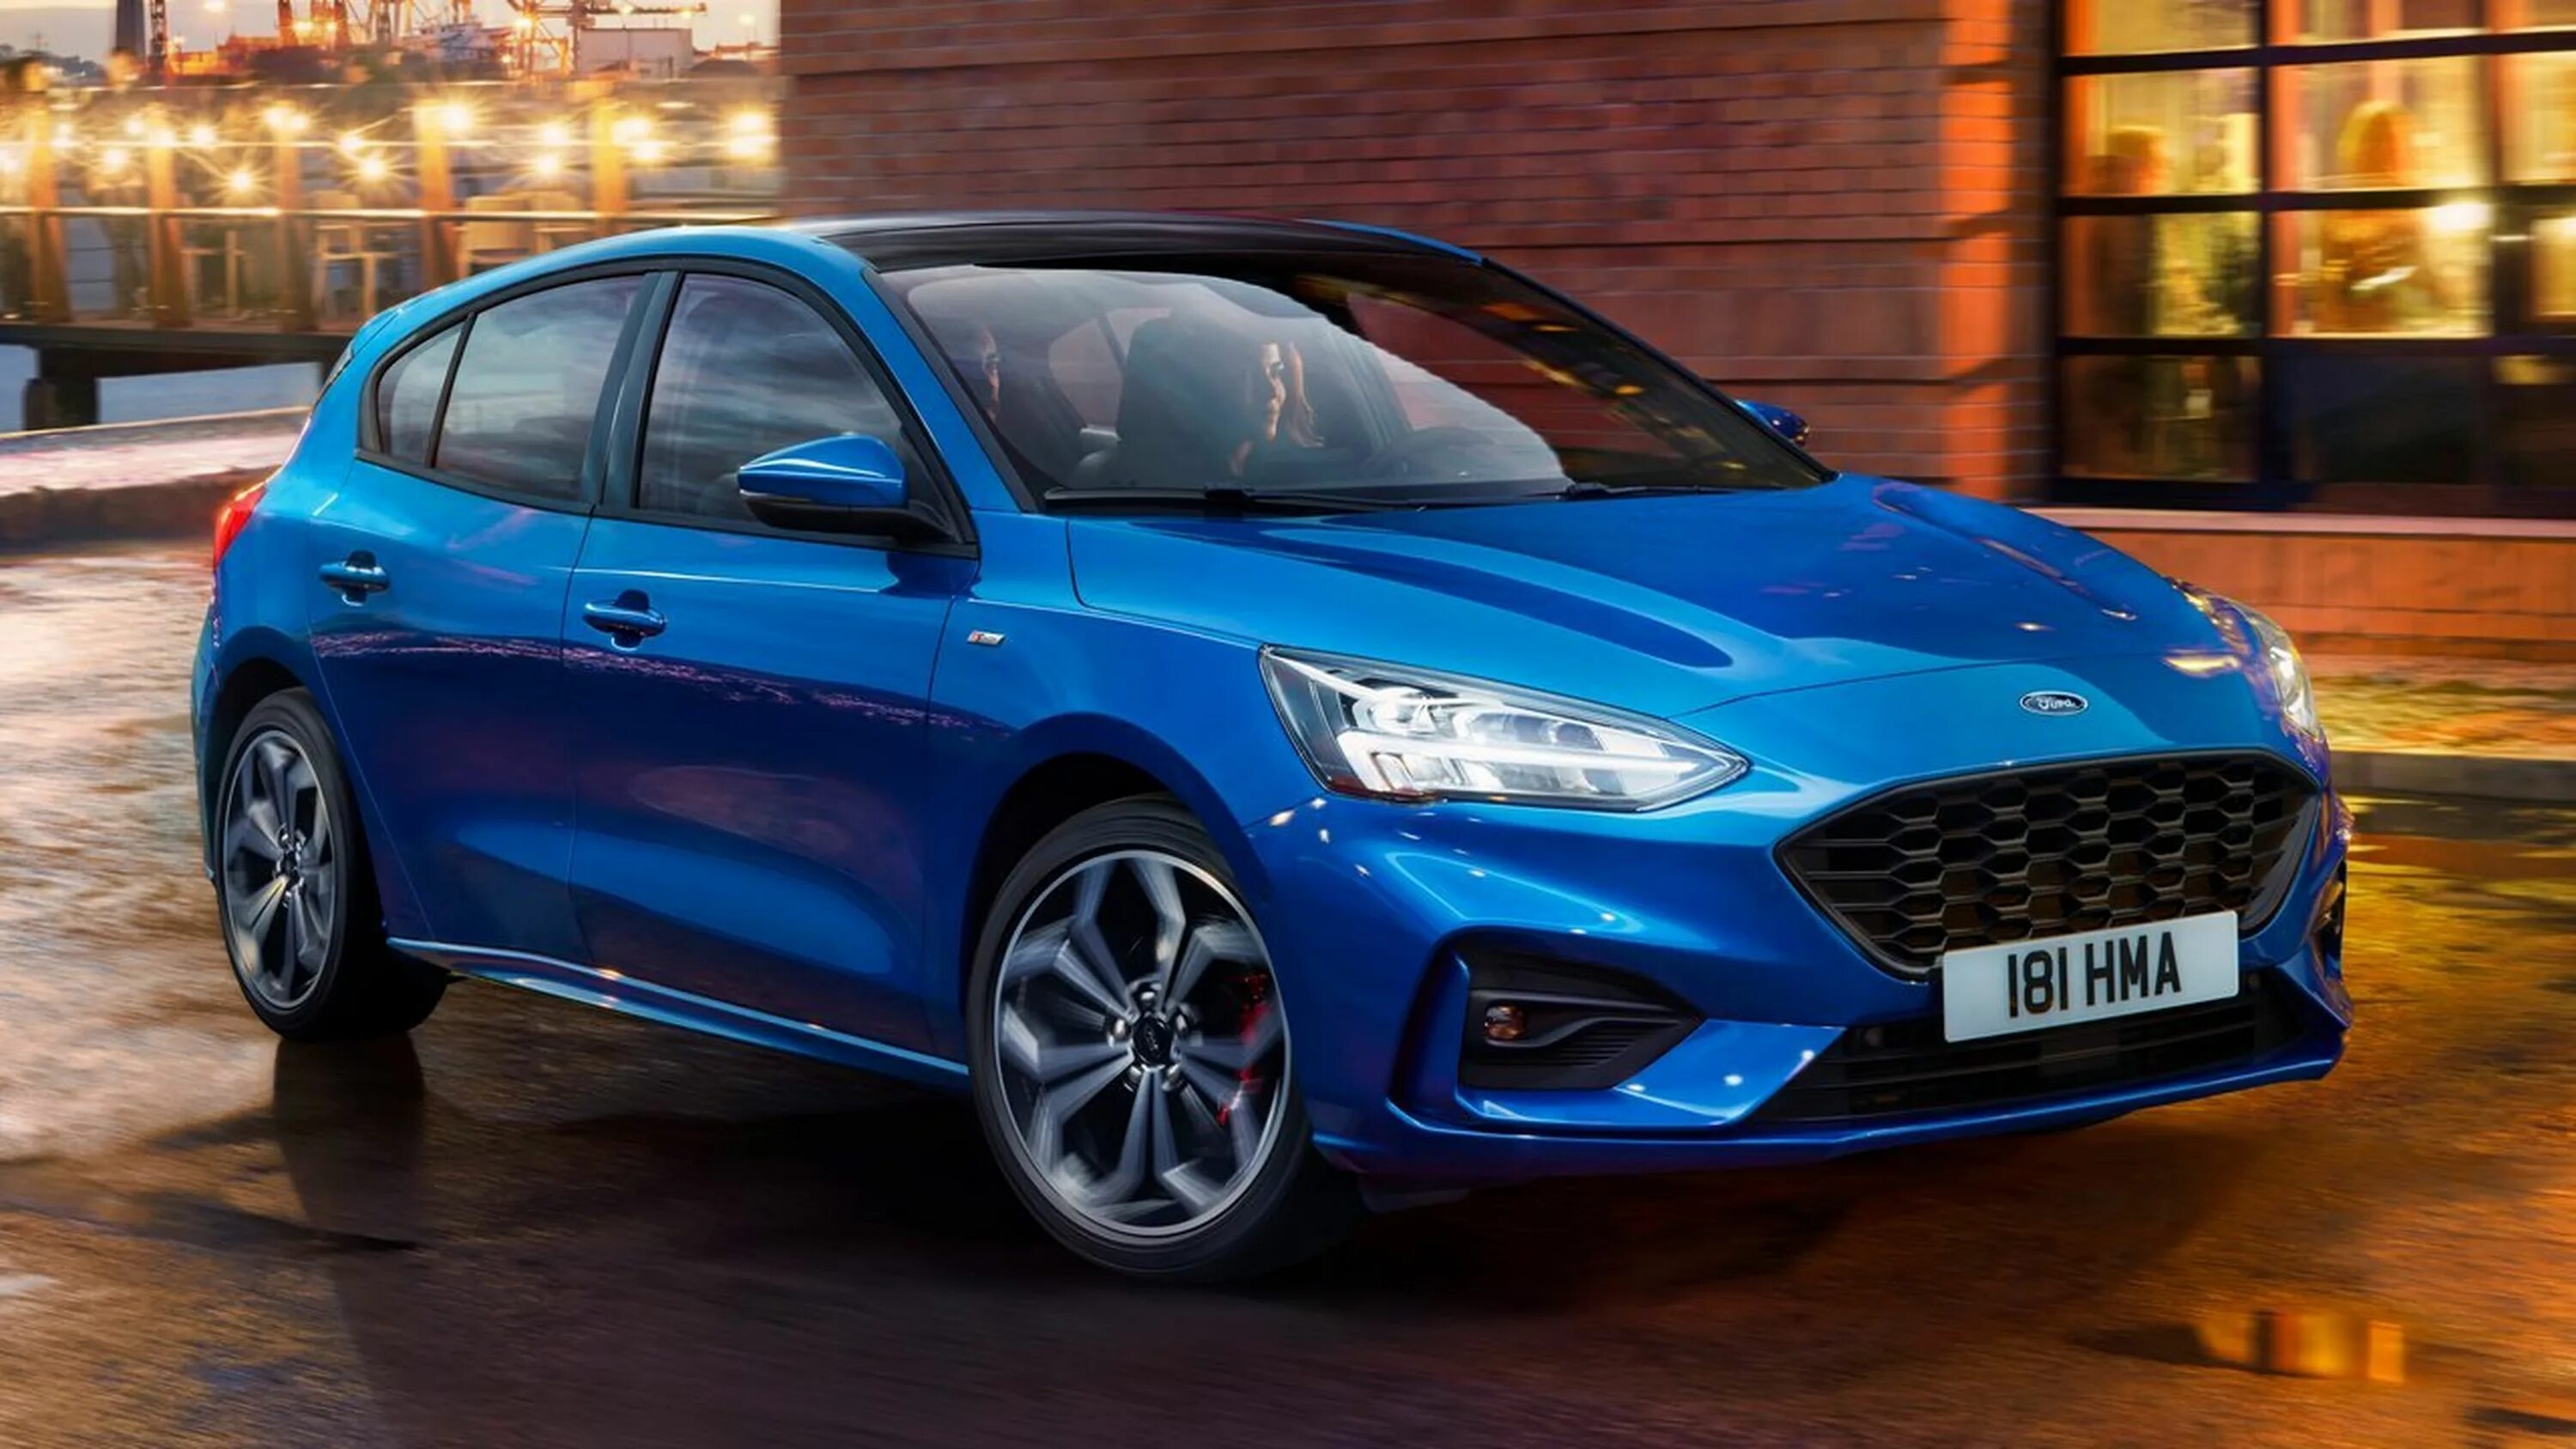 Ford Focus St line 2018. Форд фокус 4 2018. Ford Focus Hatchback 2020. Ford Focus 4 St line.